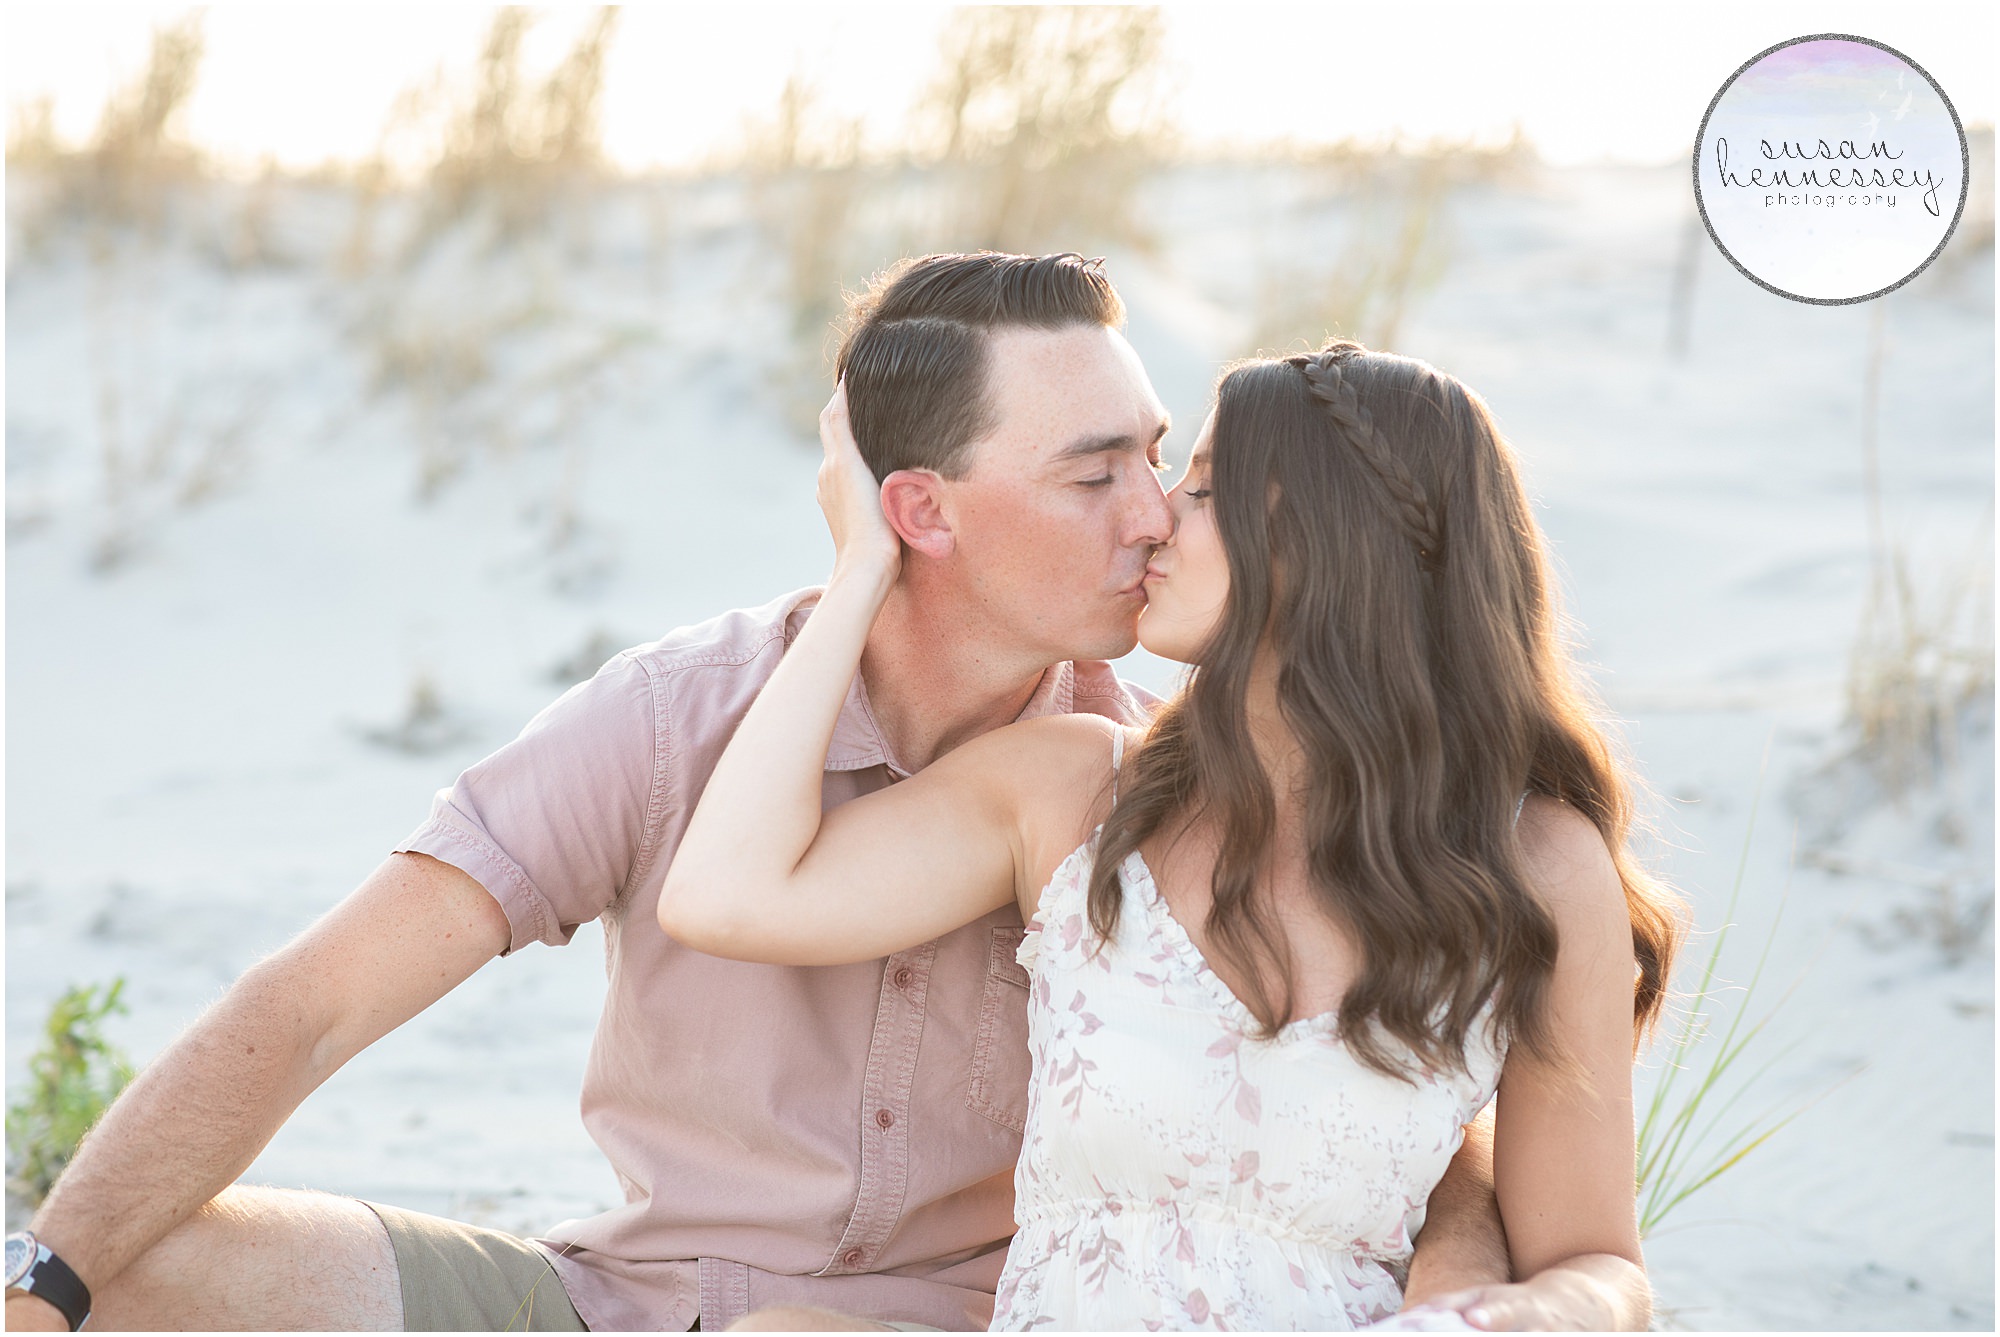 Ocean City engagement session at Corson's Inlet